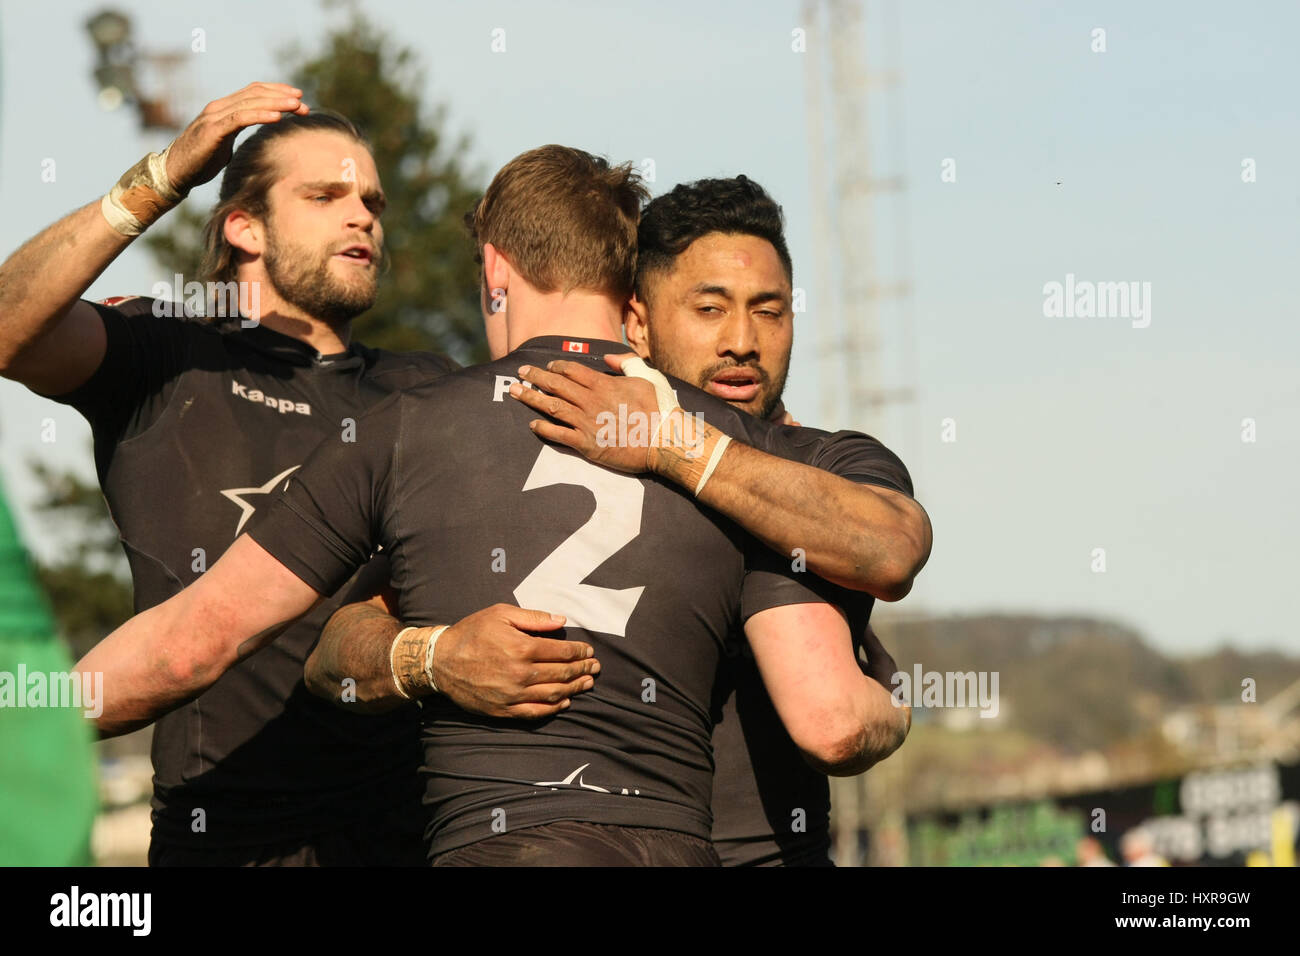 Jonny Pownall  of Toronto Wolfpack celebrates scoring the try vs Keighley Cougars  Keighley Cougars vs Toronto Wolfpack During the Kingstone Press League One clash at Cougar Park, Keighley , West Yorkshire,  Picture by Stephen Gaunt/Touchlinepics.com/Alamy Live News Stock Photo